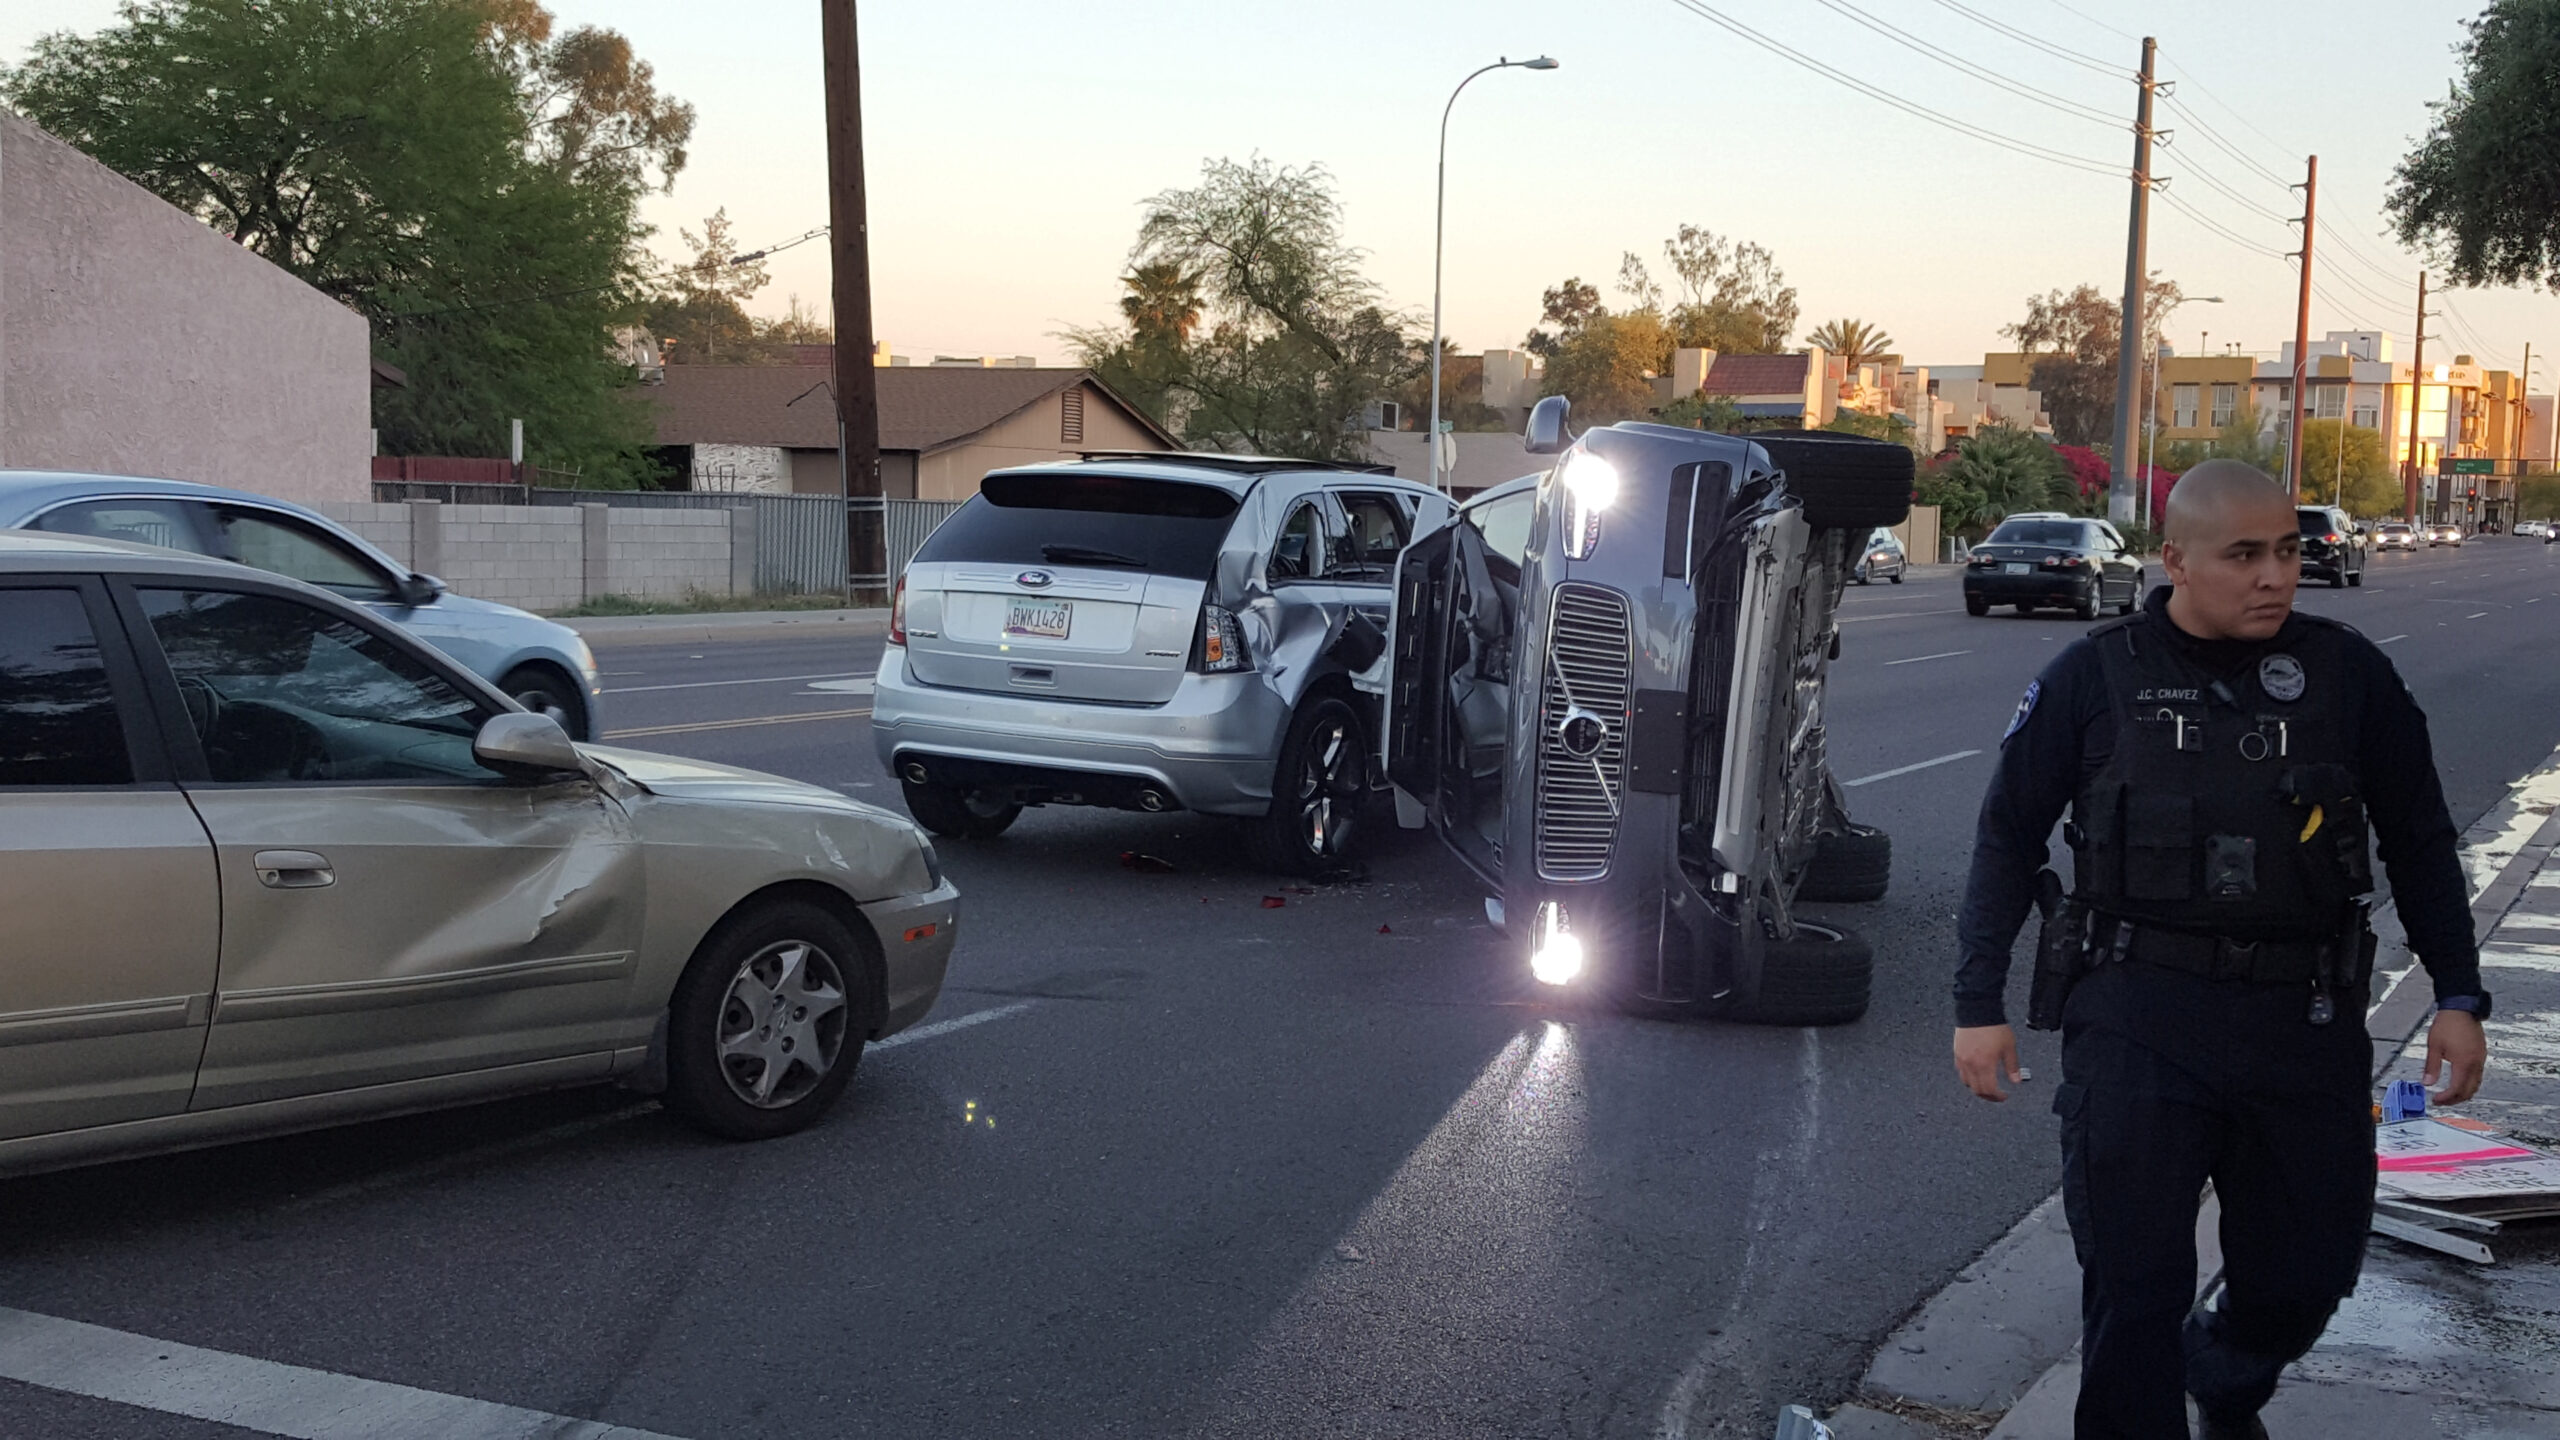 A self-driven Volvo SUV owned and operated by Uber Technologies Inc. is flipped on its side after a collision in Tempe, Arizona, U.S. on March 24, 2017. Courtesy FRESCO NEWS/Mark Beach/Handout via REUTERS ATTENTION EDITORS - THIS IMAGE WAS PROVIDED BY A THIRD PARTY. EDITORIAL USE ONLY. MANDATORY CREDIT - RTX32PJX